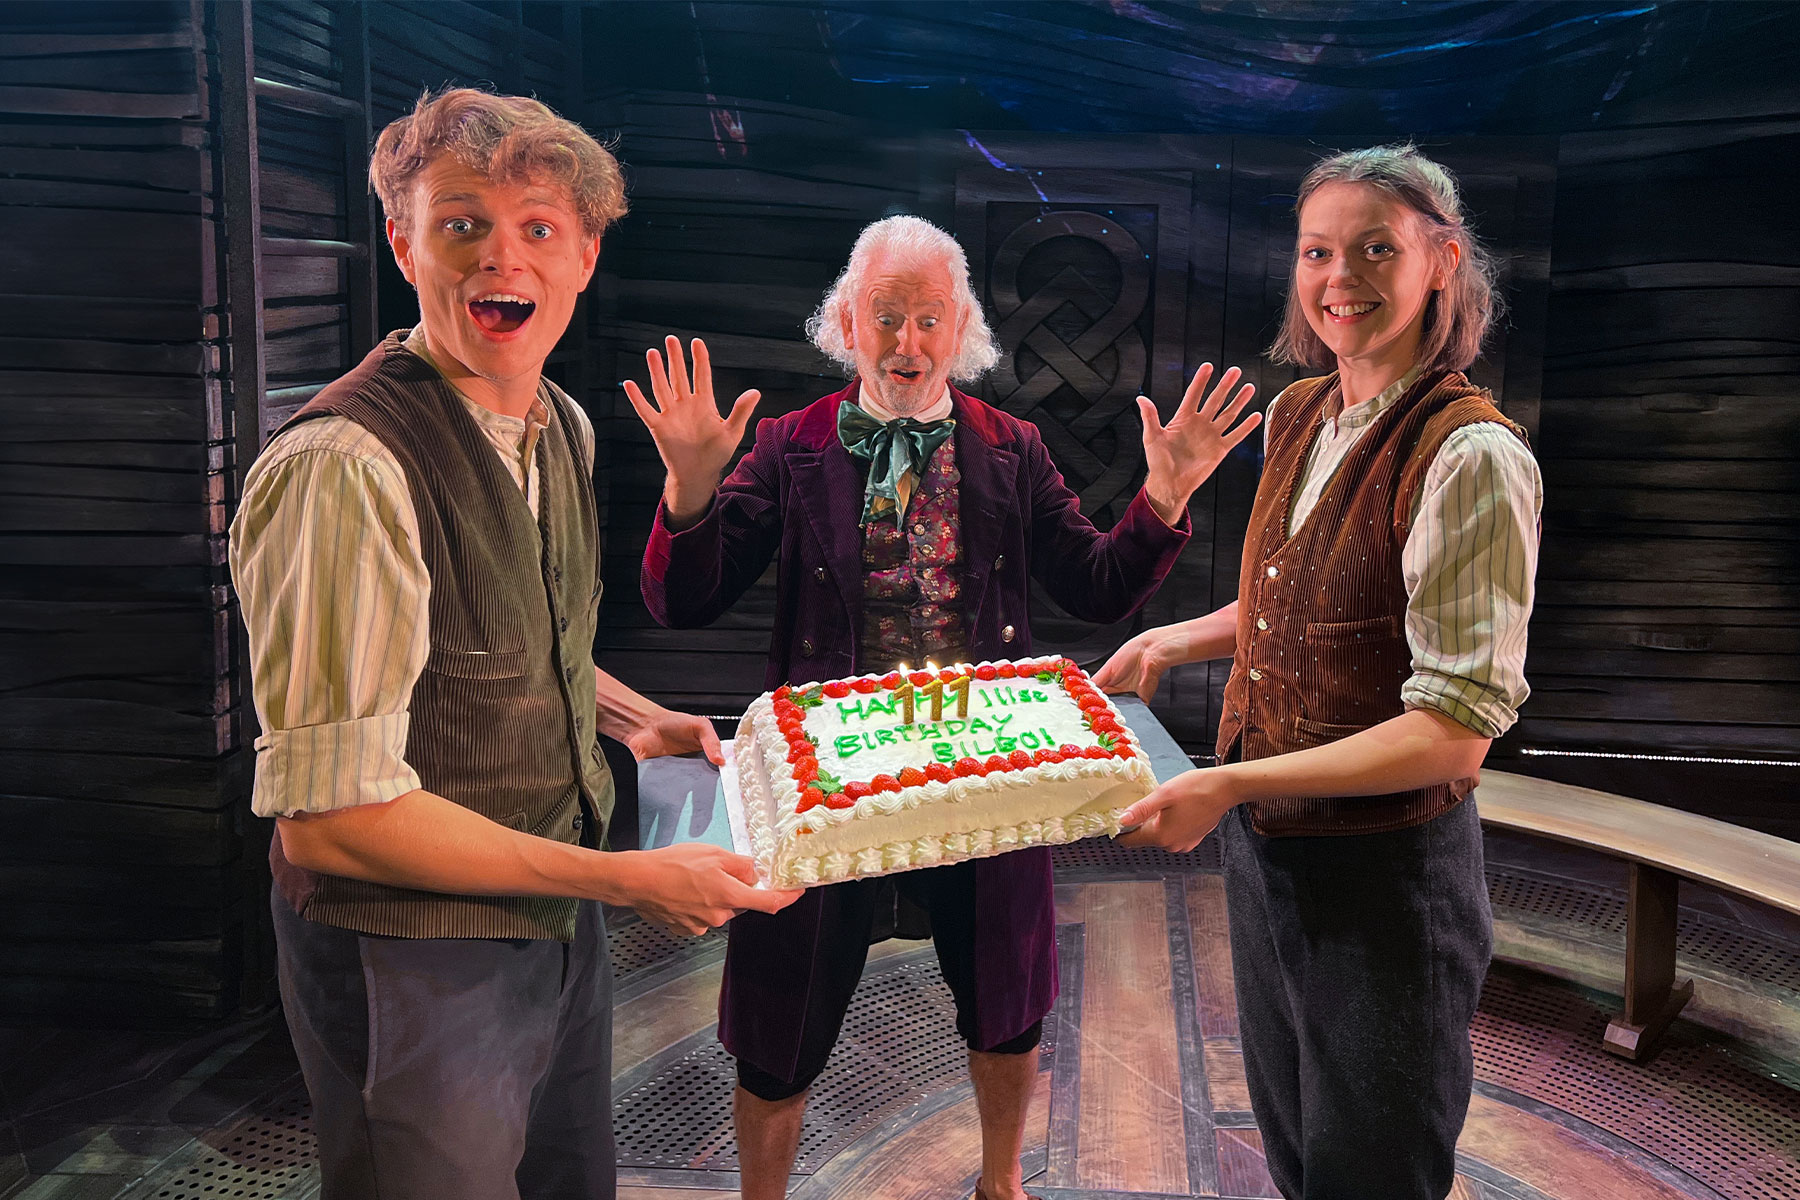 The Lord of the Rings cast members Geraint Downing, John O’Mahony and Amelia Gabriel on stage with a birthday cake